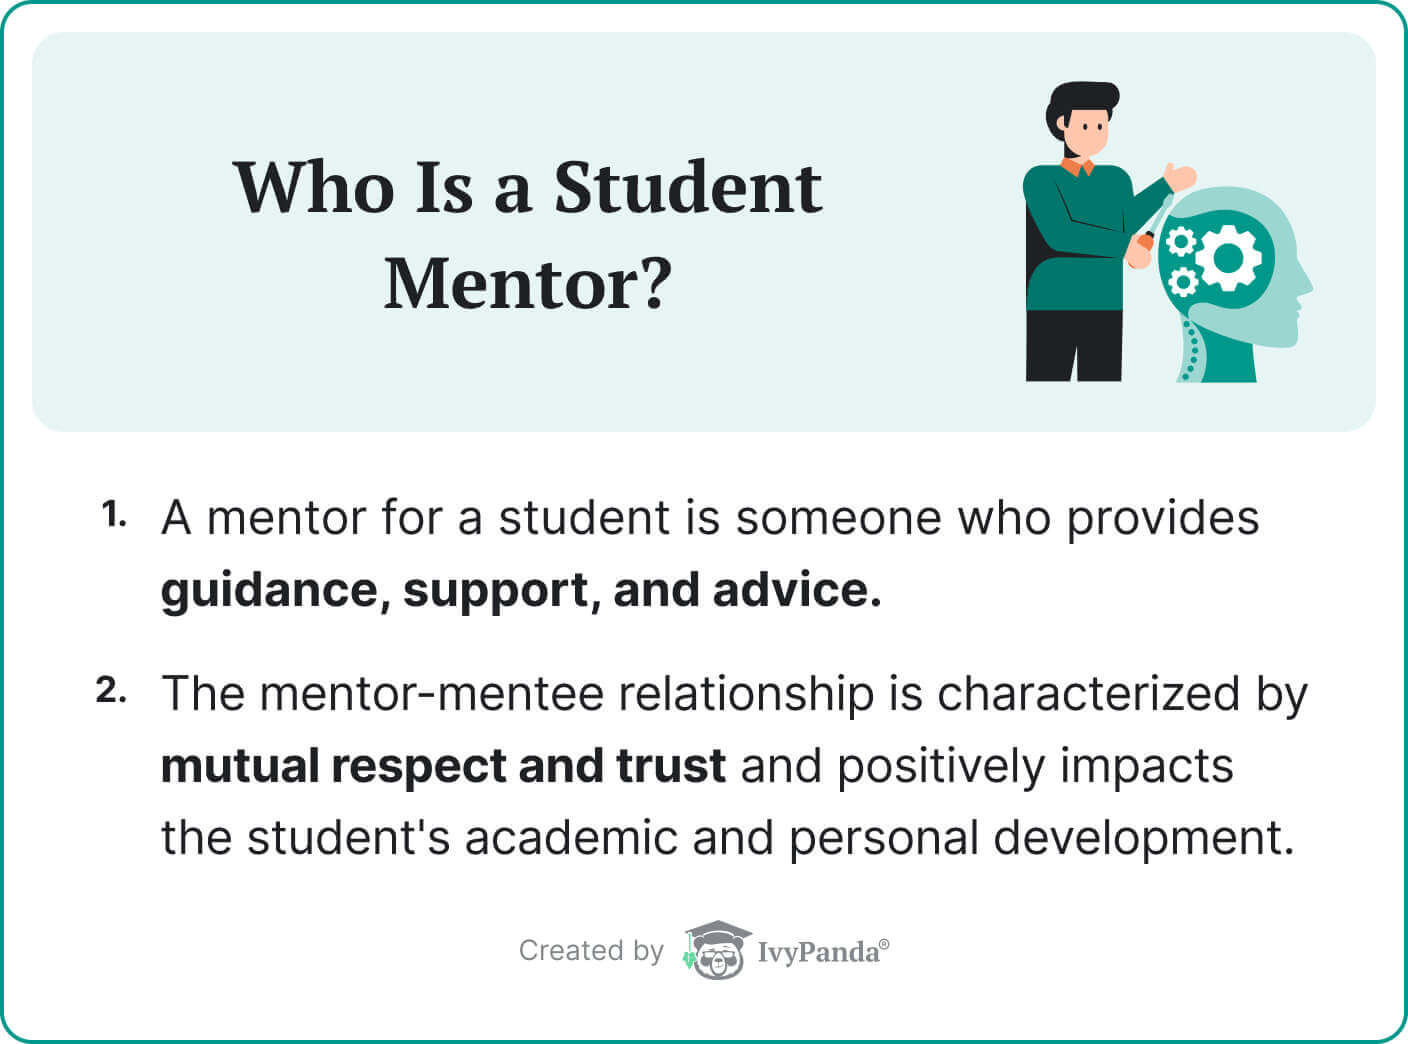 The picture provides introductory information about a student mentor.